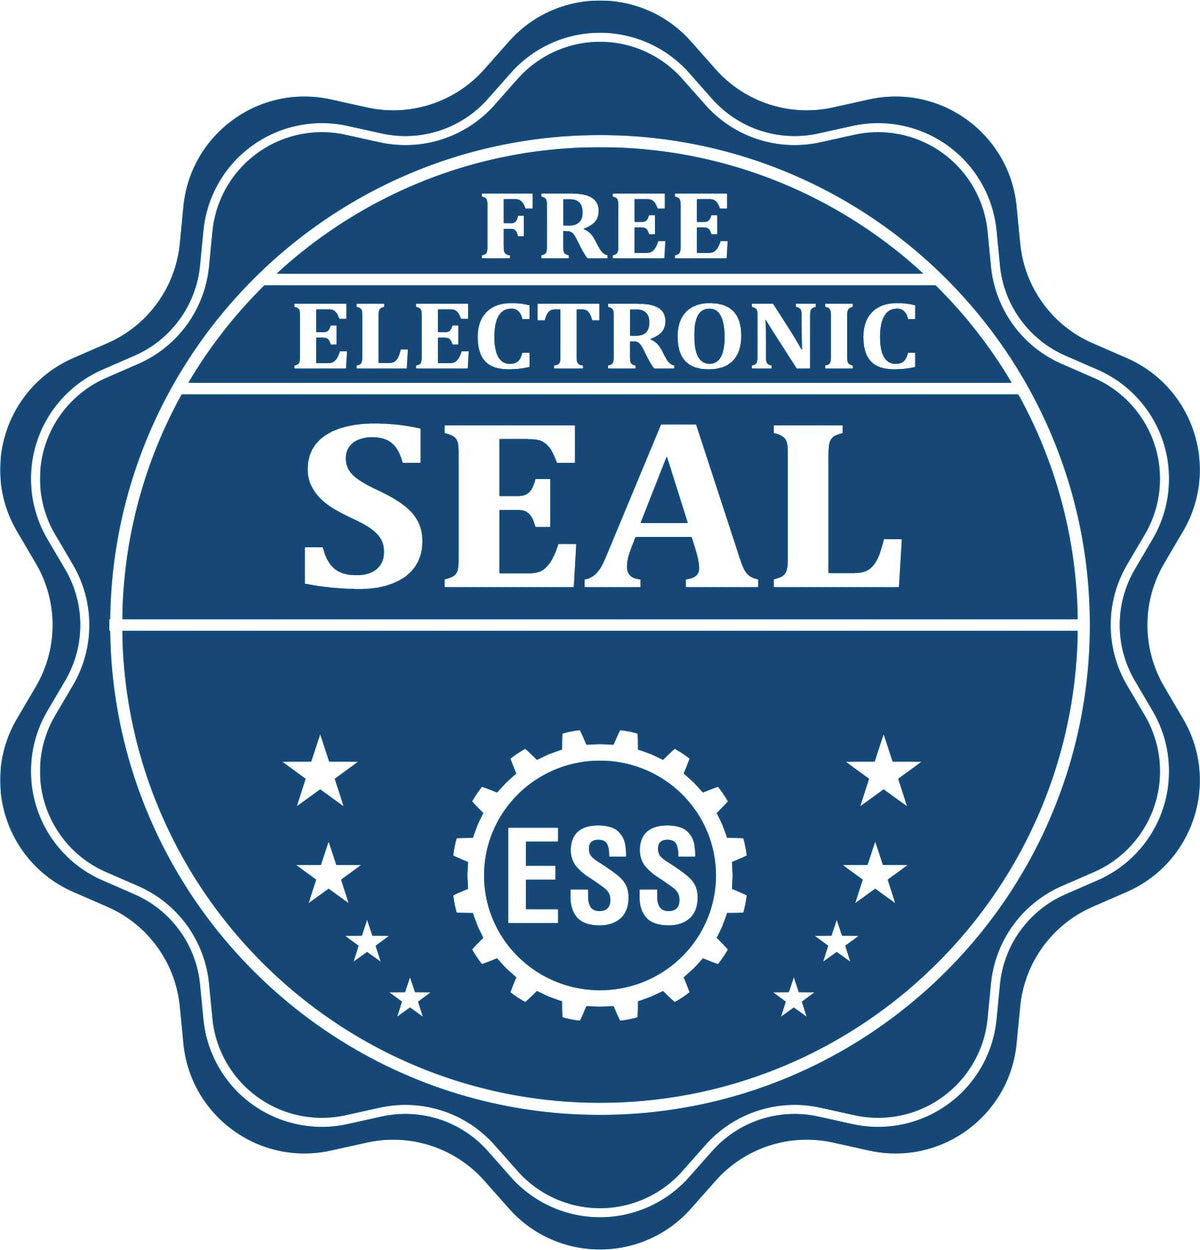 A badge showing a free electronic seal for the Heavy-Duty Vermont Rectangular Notary Stamp with stars and the ESS gear on the emblem.